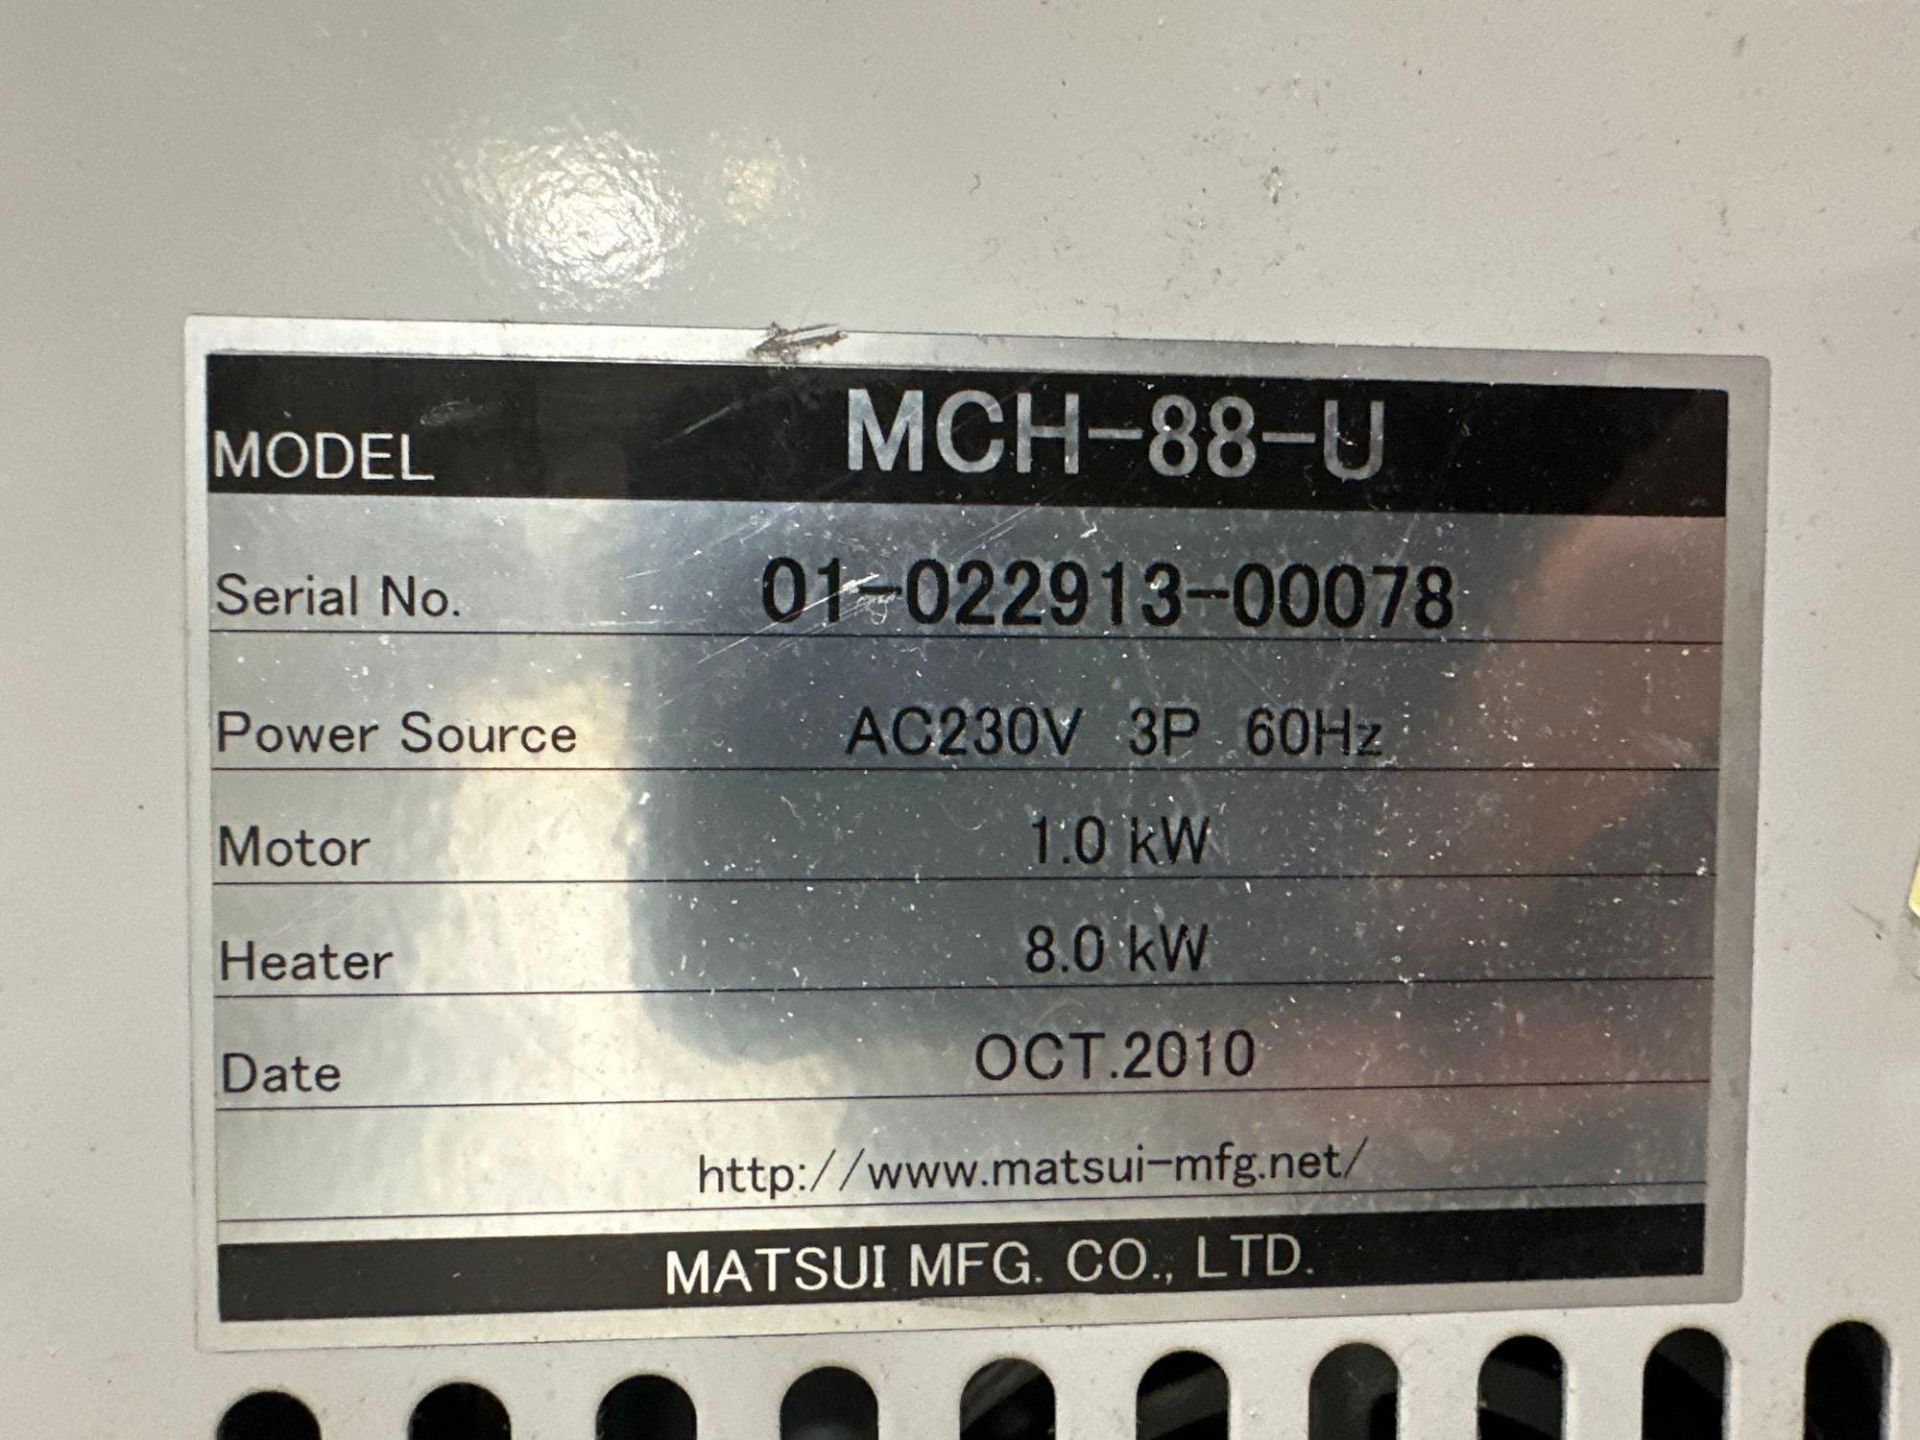 Matsui MCH-88-U Thermolator,  1.3hp, 8kw, 24gpm, 57psi, Equipped with Alarm Lamp and Buzzer - Image 4 of 4